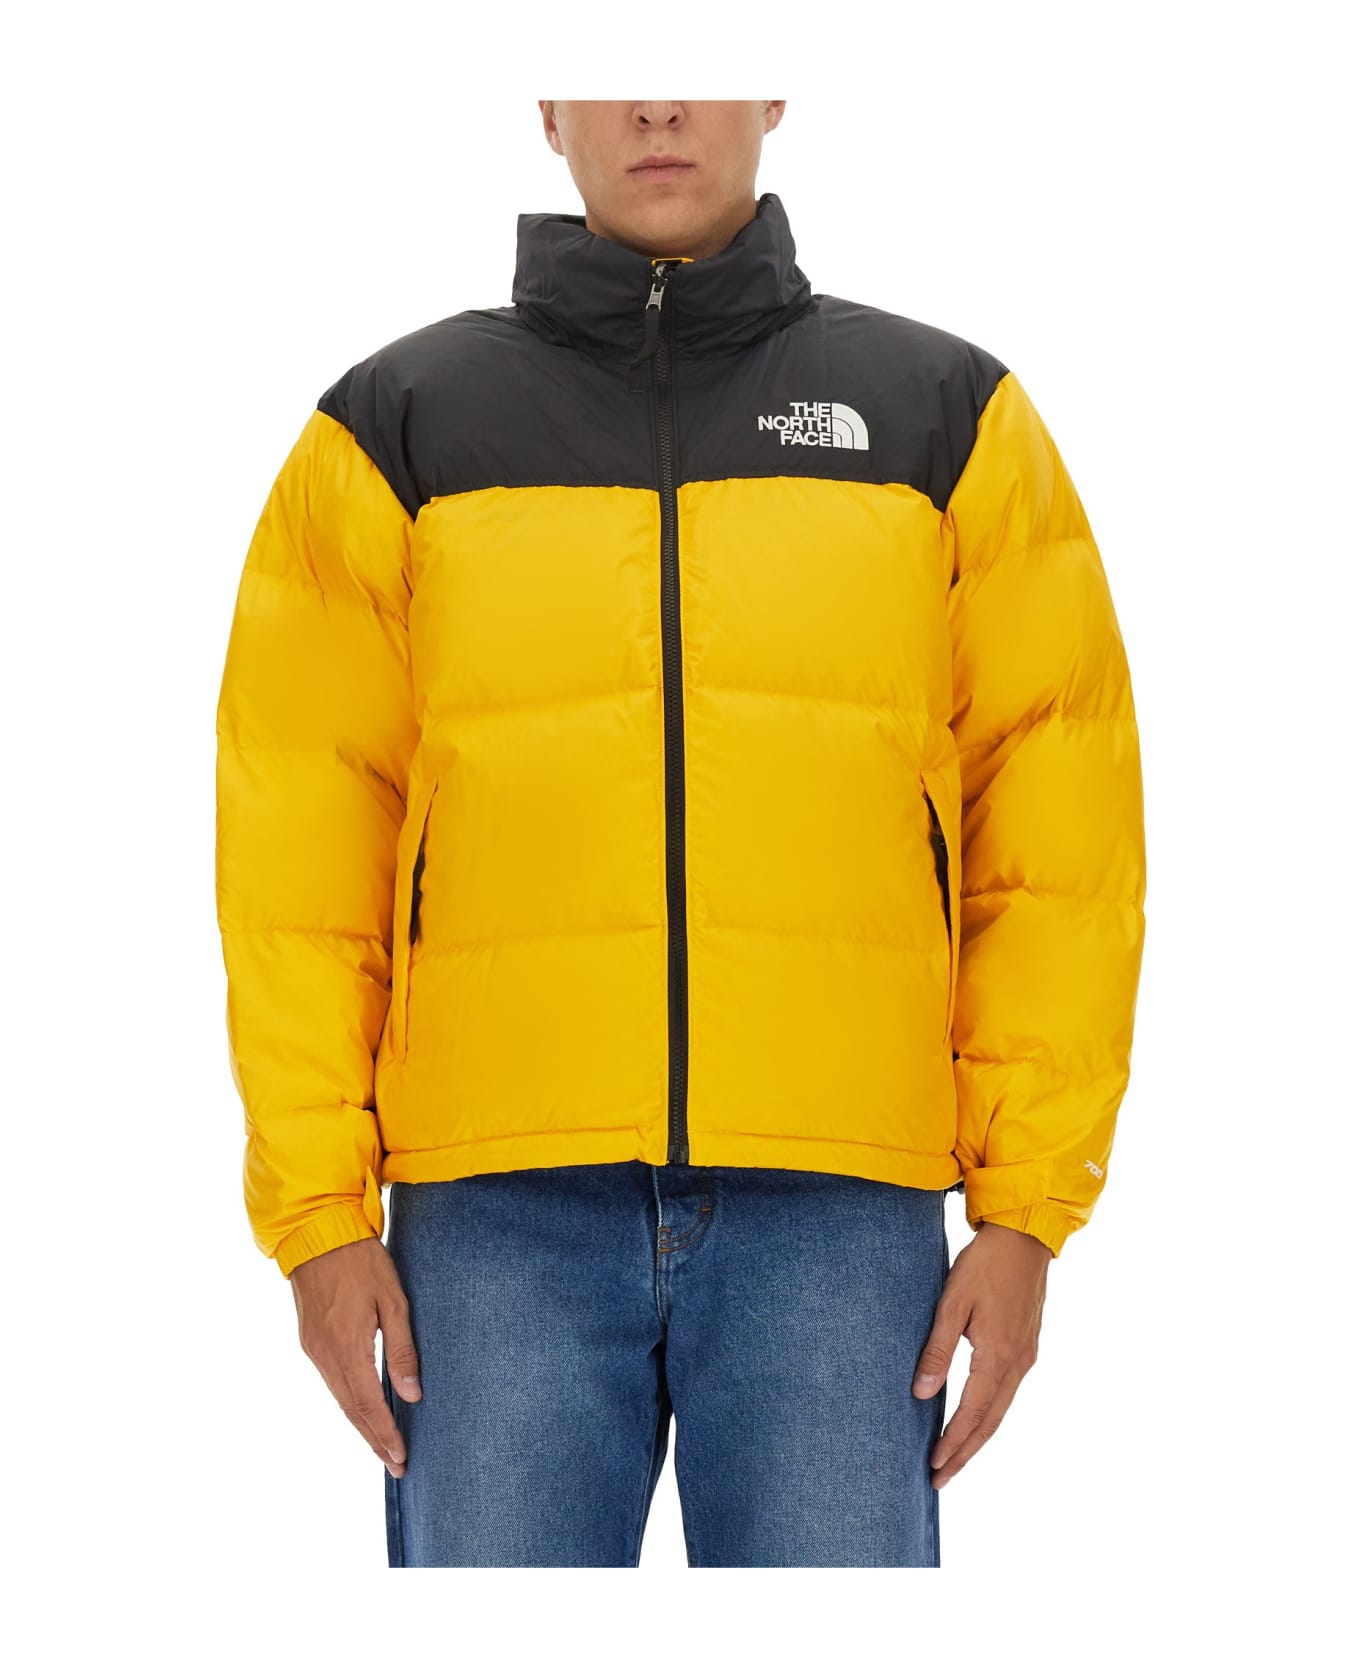 The North Face 1996 Nylon Down Jacket - Gold/black